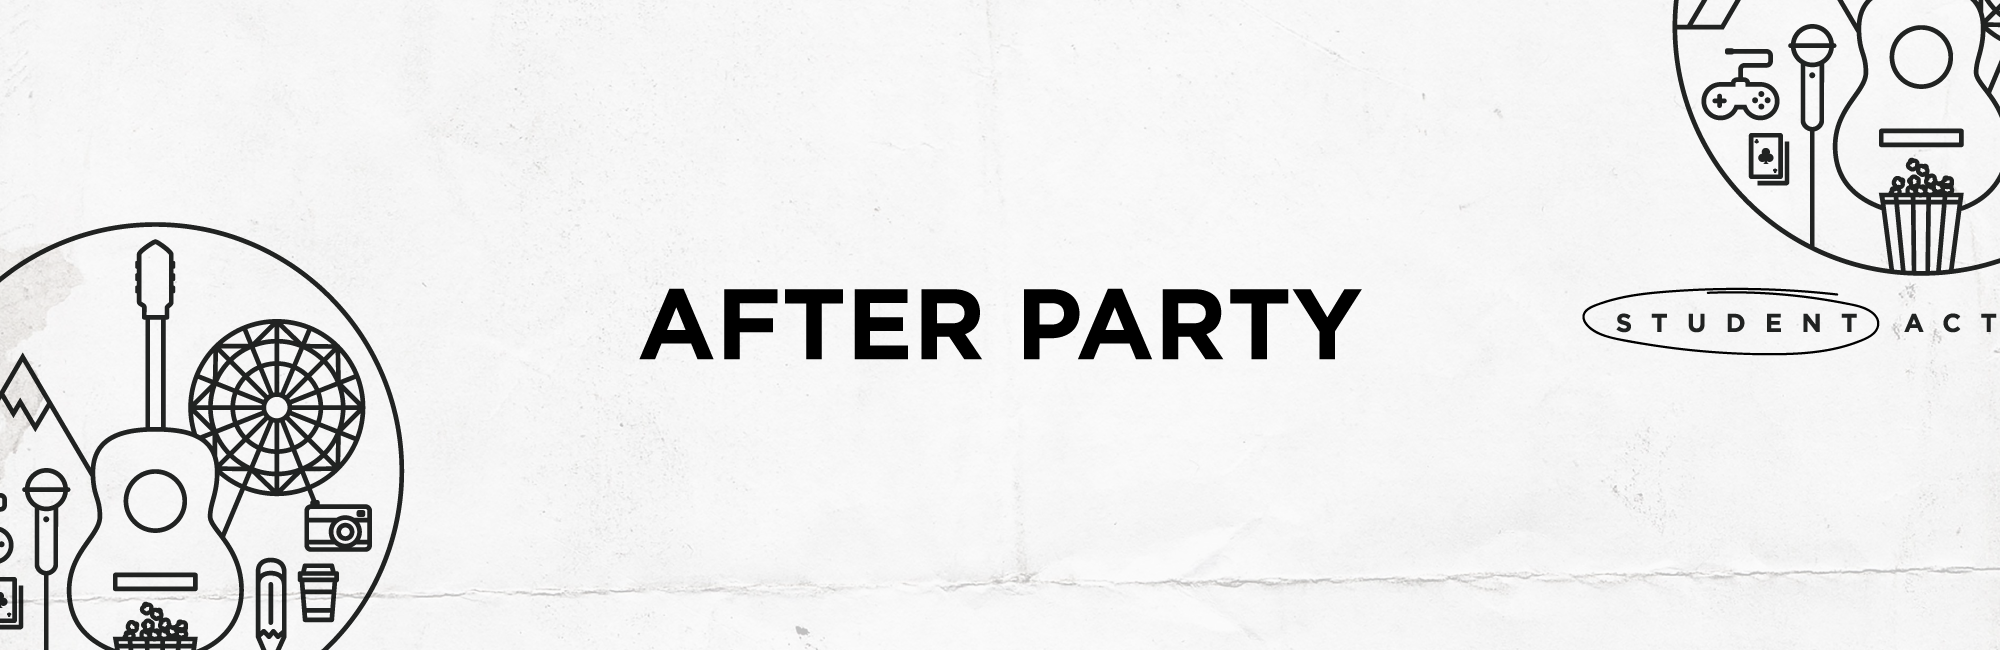 After Party - Business Sponsor